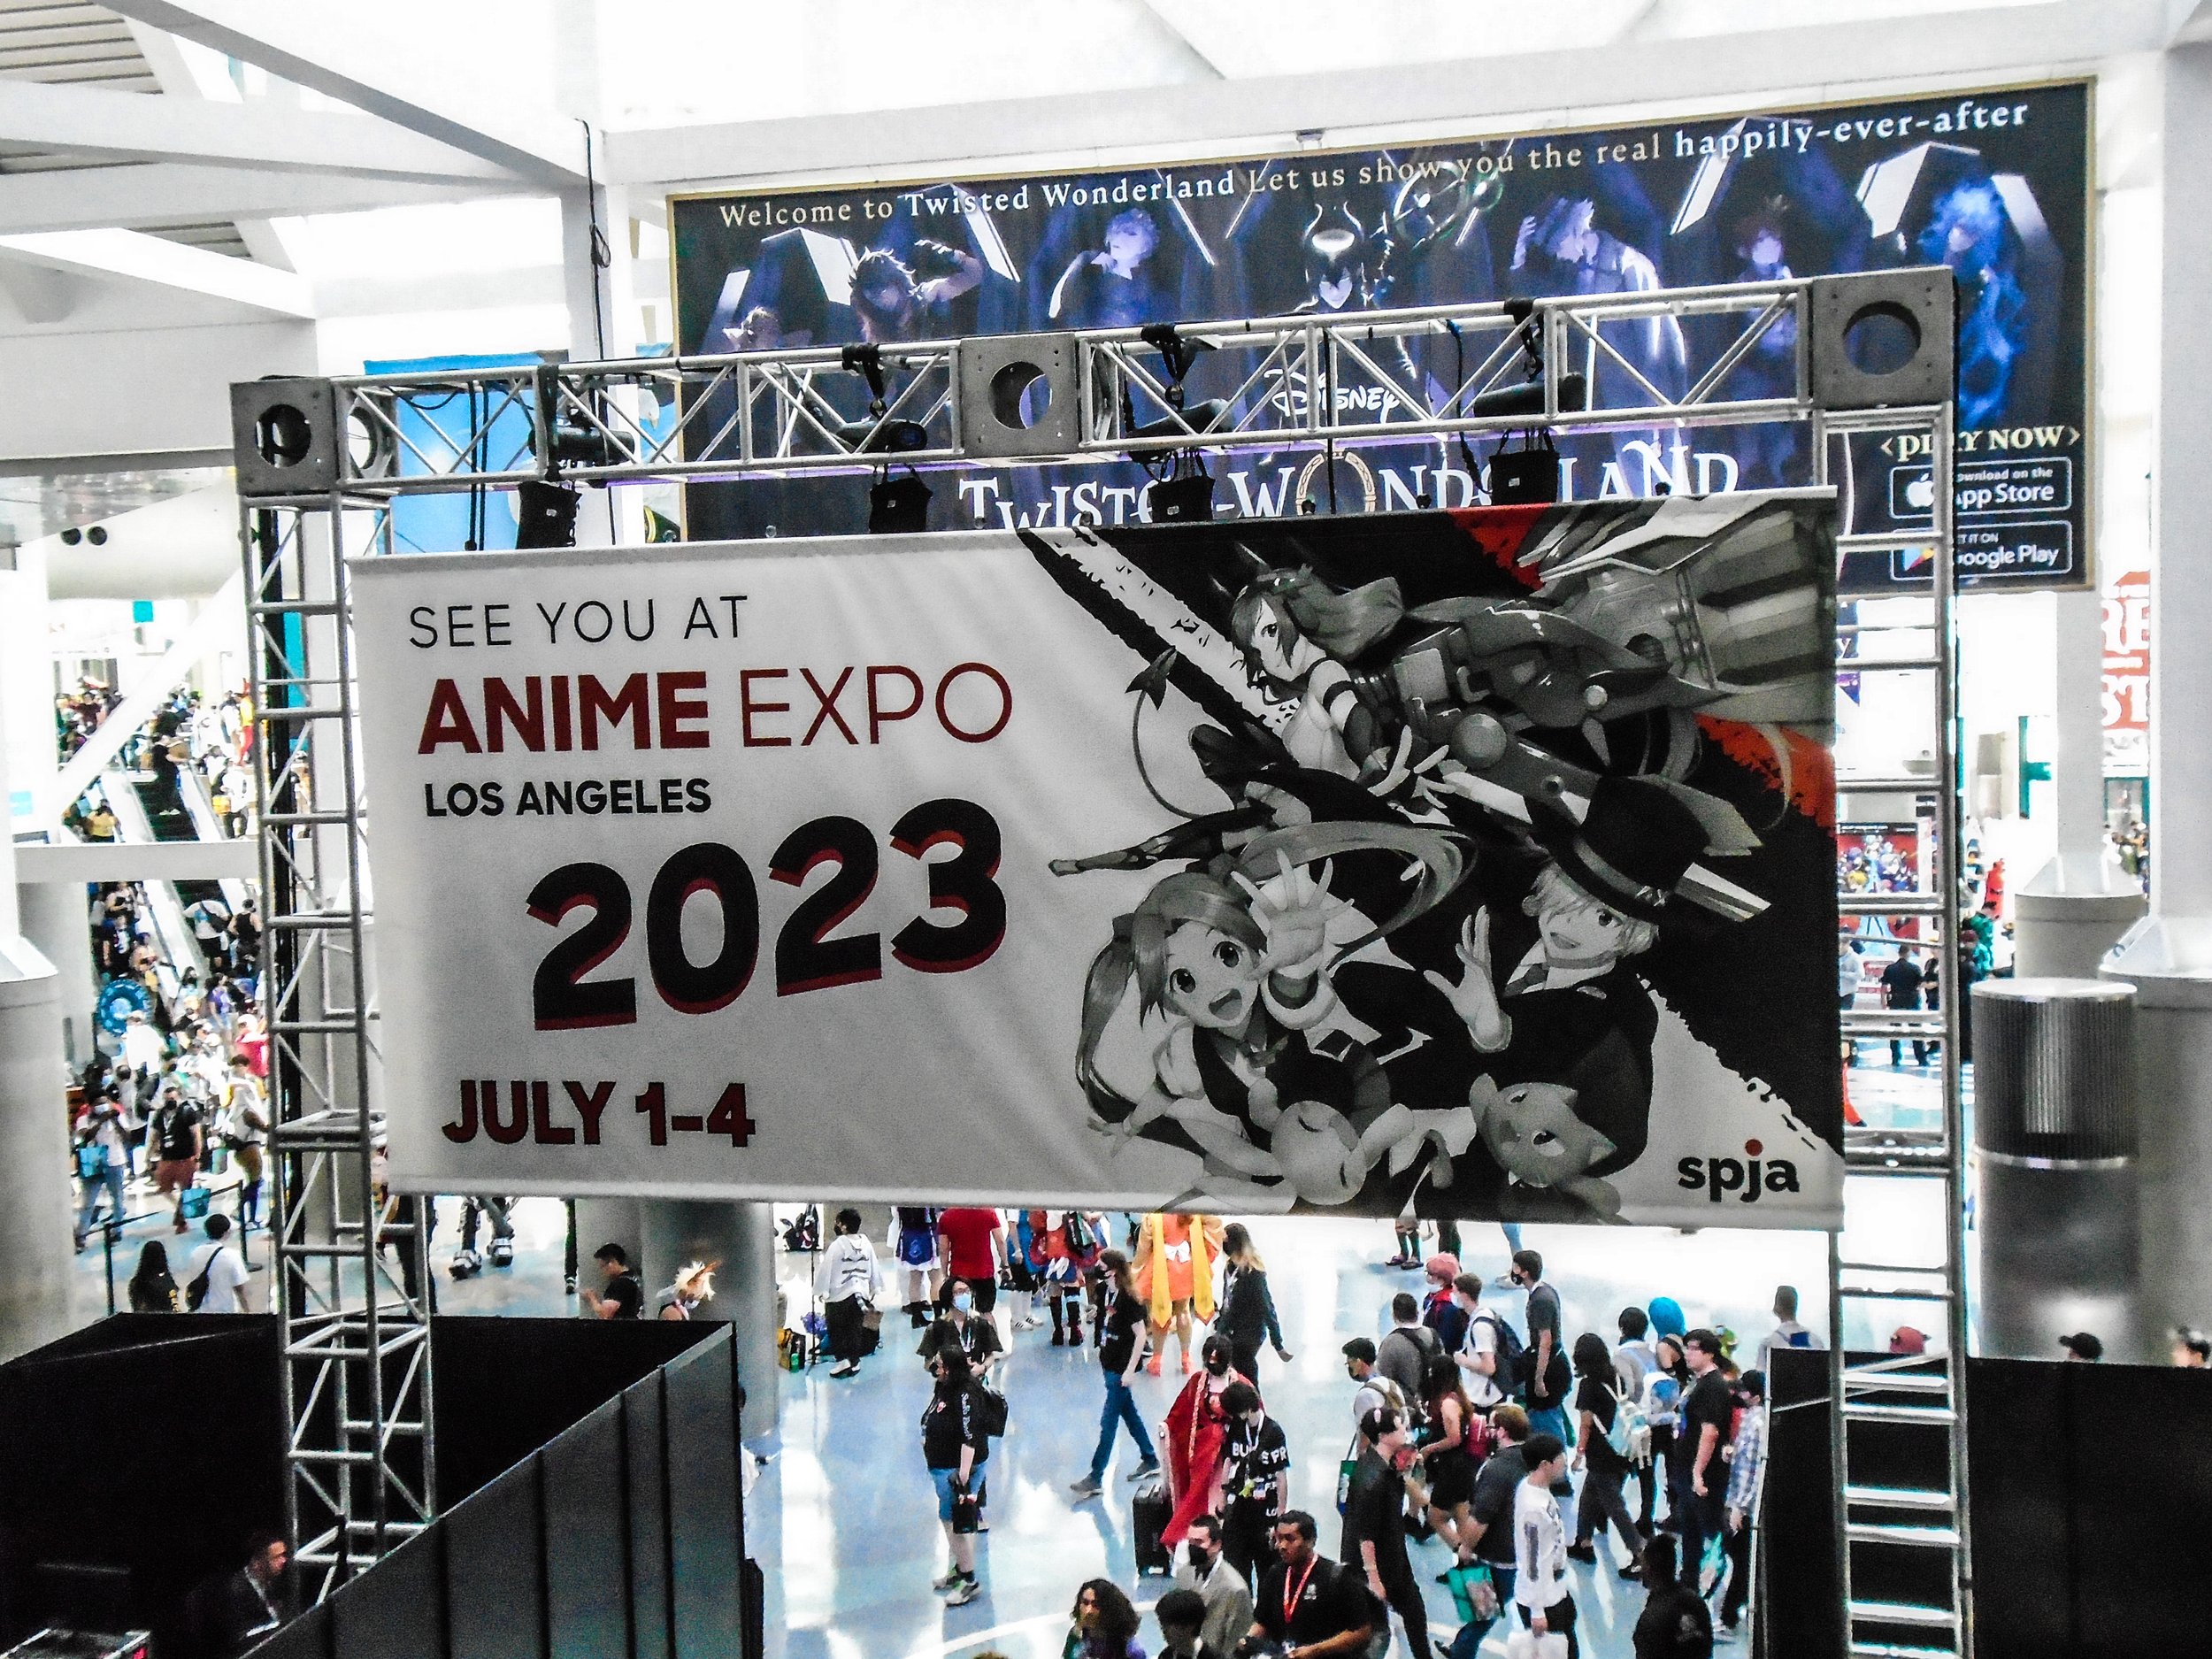 Anime Expo 2014 Popularity and its Problems  Overmental